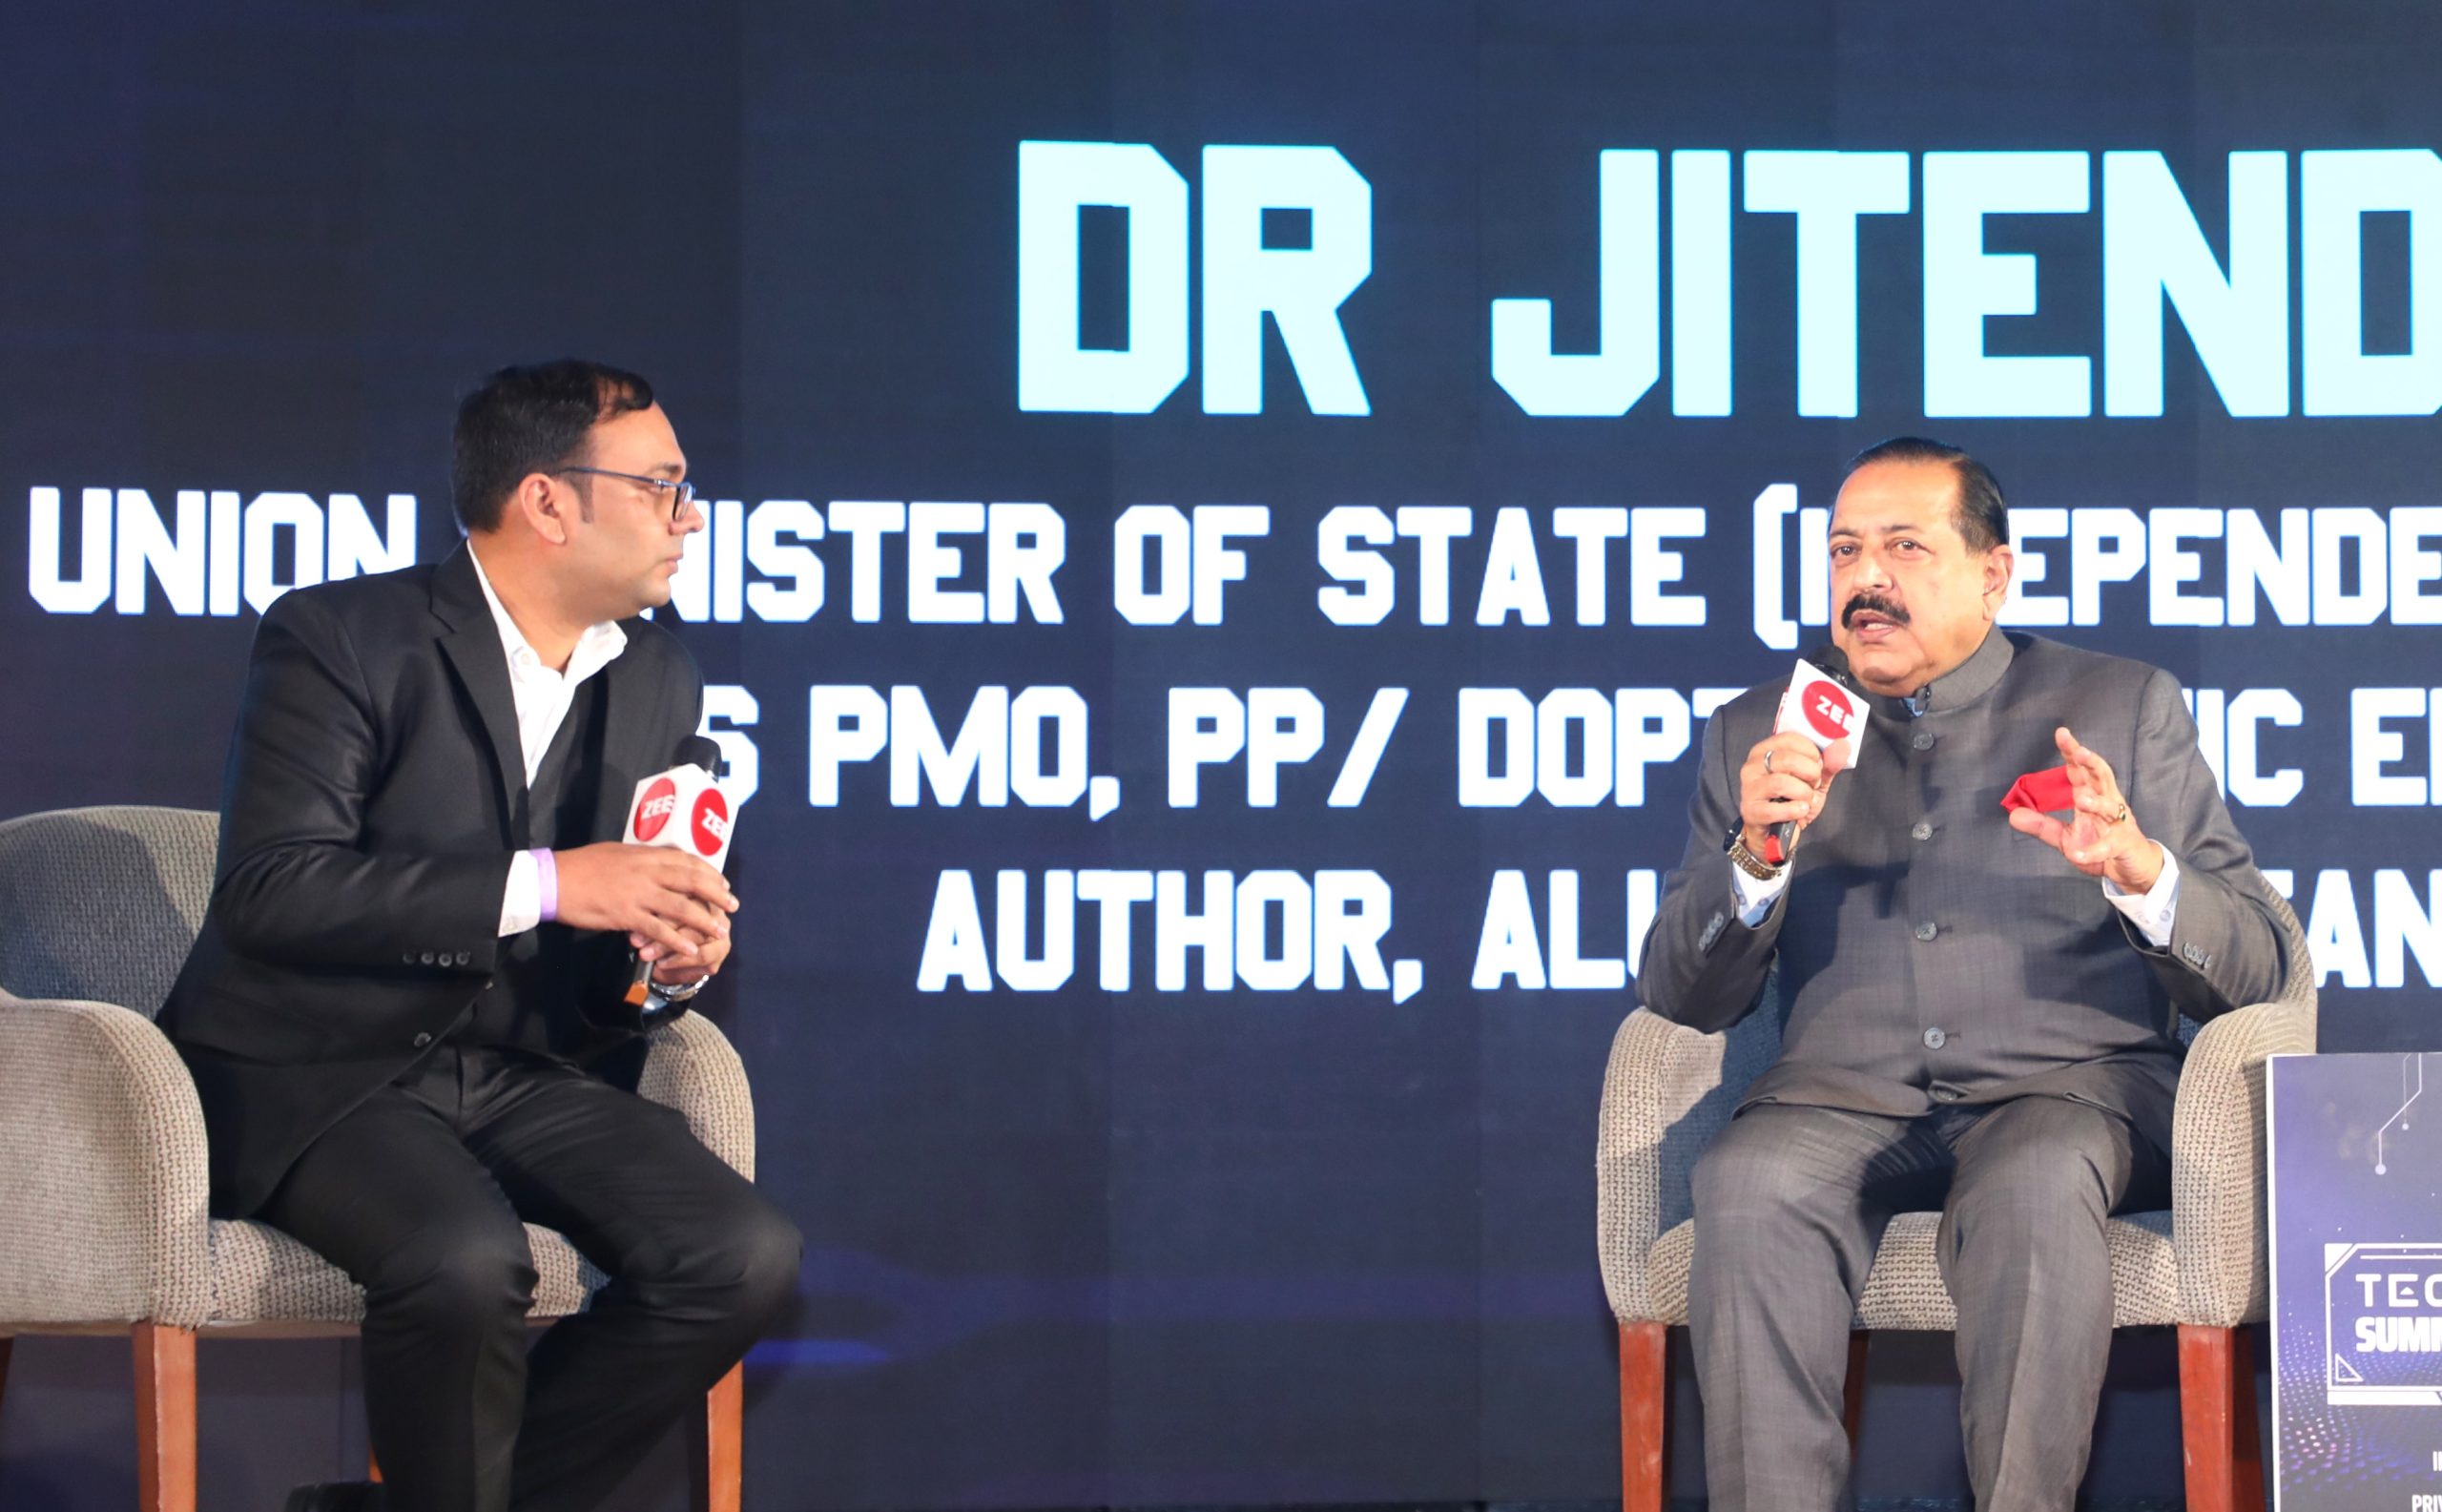 Over Rs 1,000 Cr Funding In Area Startups In 9 Months: Dr Jitendra